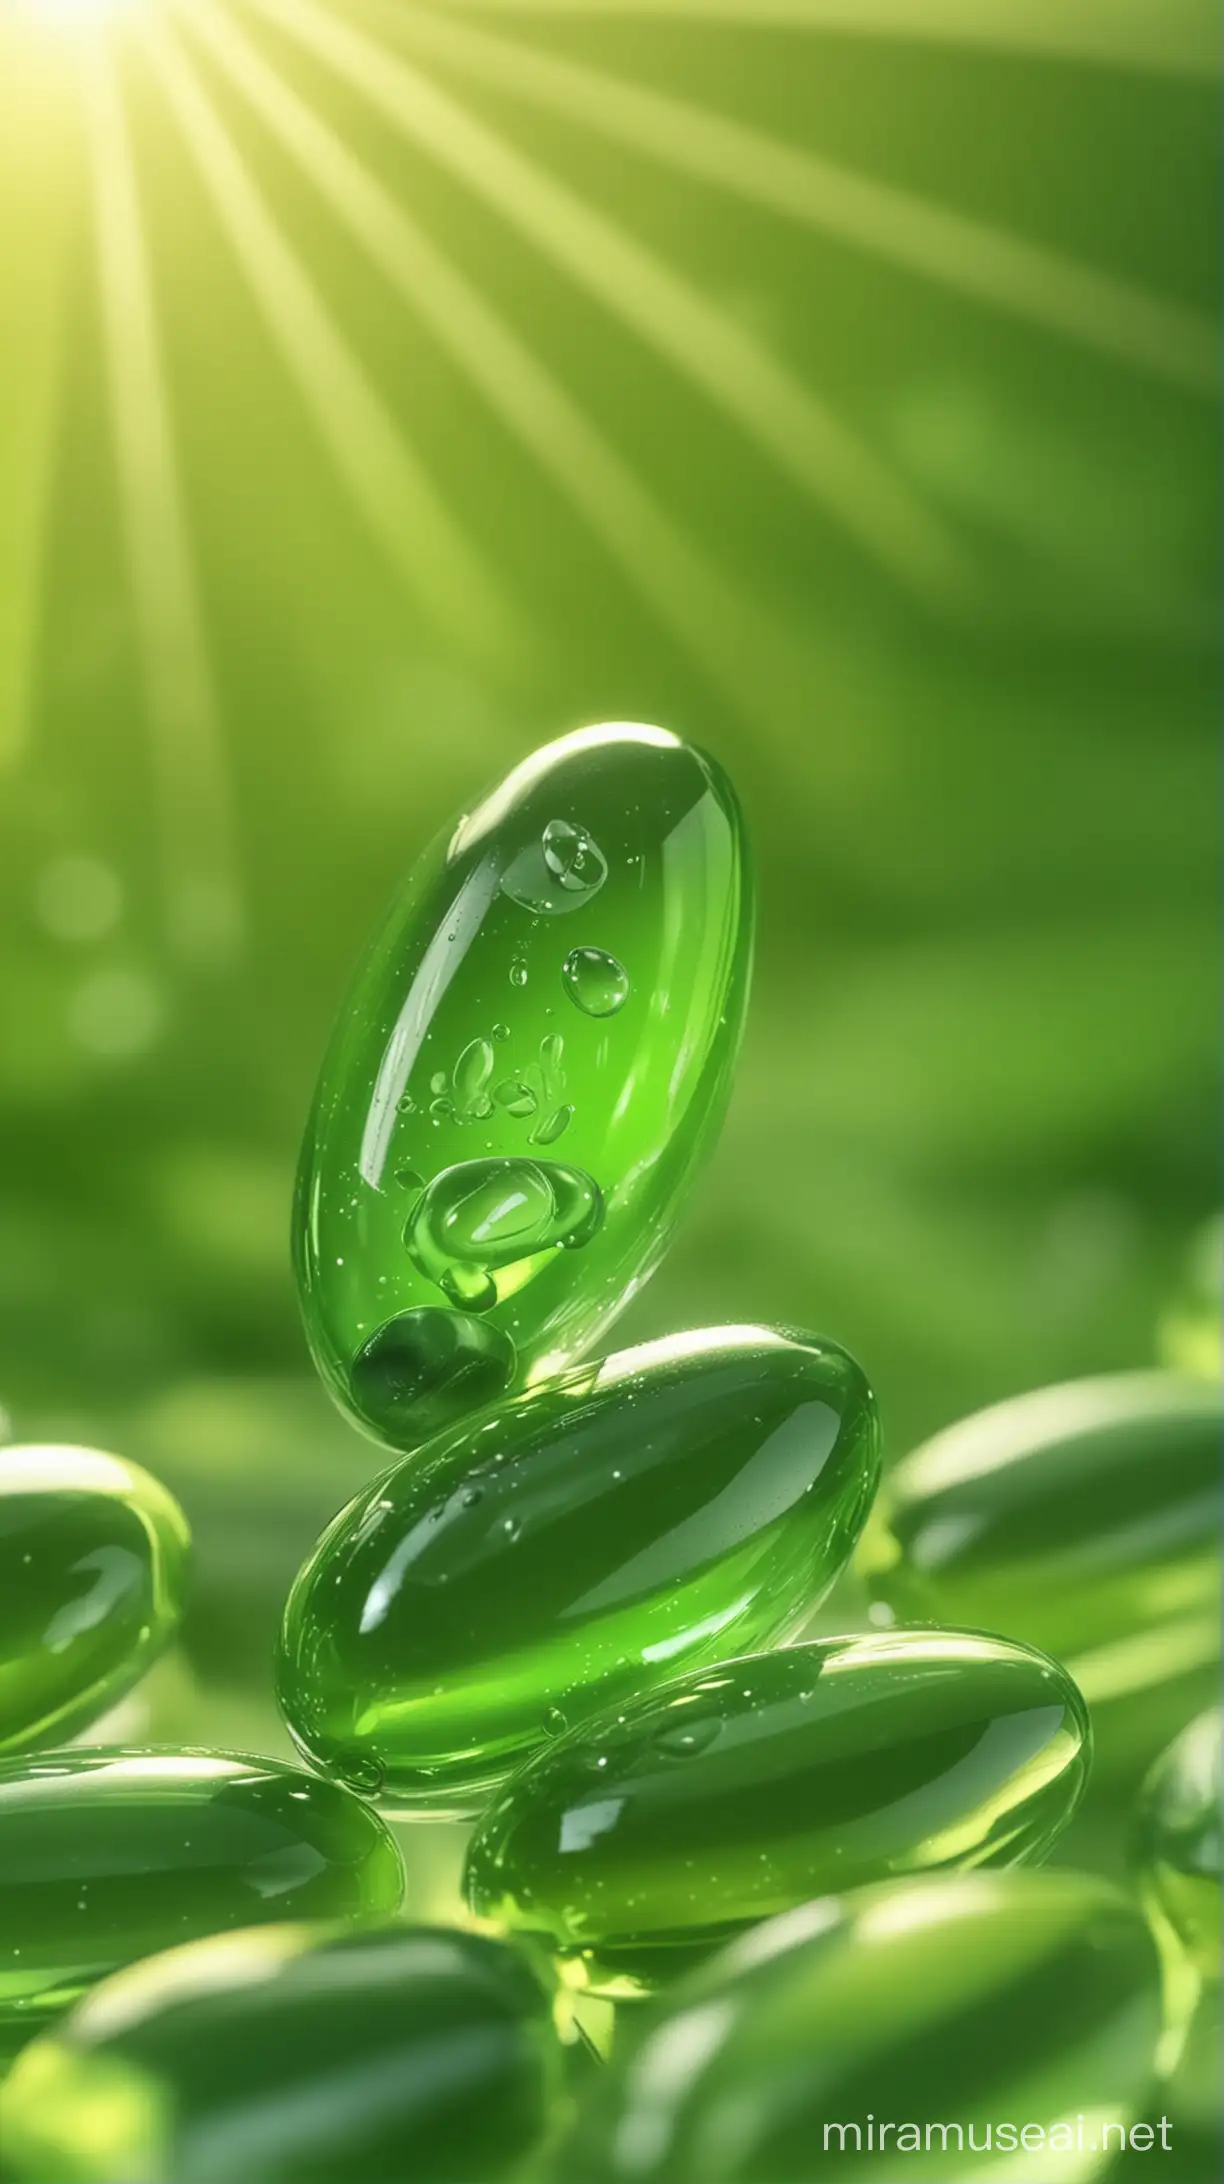 Vibrant Green Vitamin E Capsules on a Natural Background with Sunlight Effect